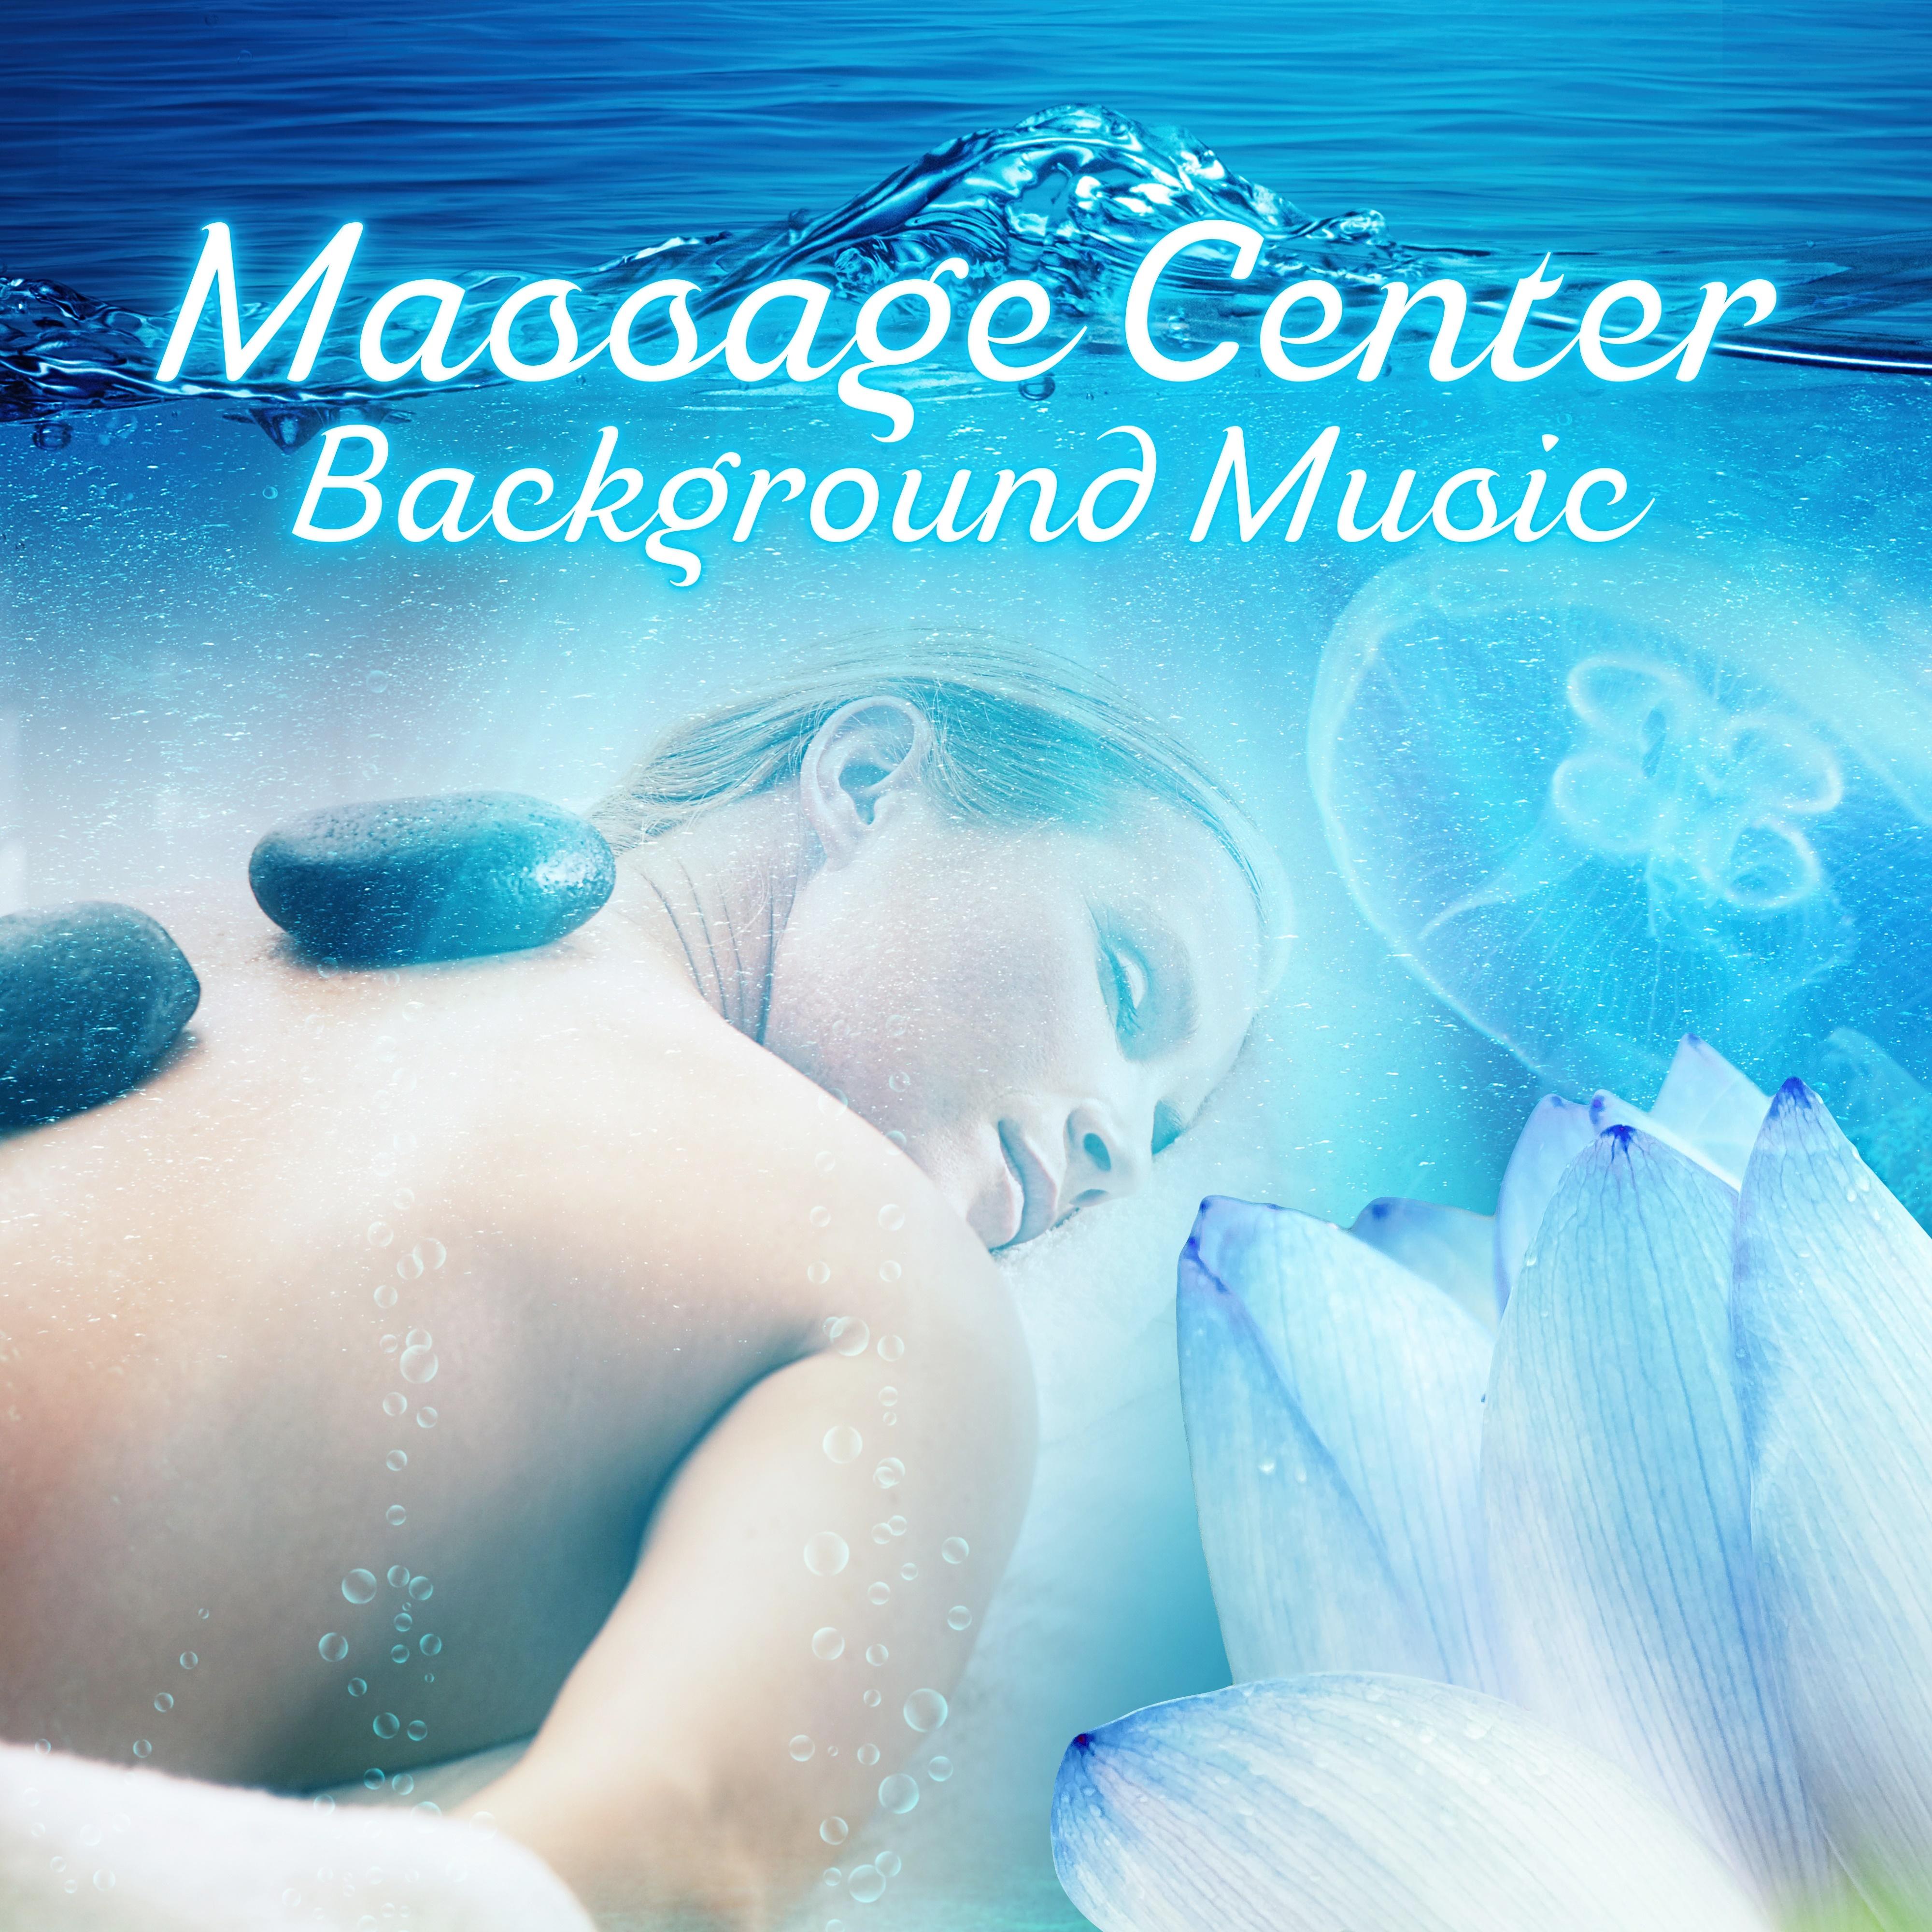 Massage Center Background Music – Relaxing Music with Nature Sounds for Beauty Center, Nail Salon, Manicure & Pedicure, Wellness Spa, Home Spa Relaxation, Relax in Skin Clinic, Health & Beauty, Tranquility Spa